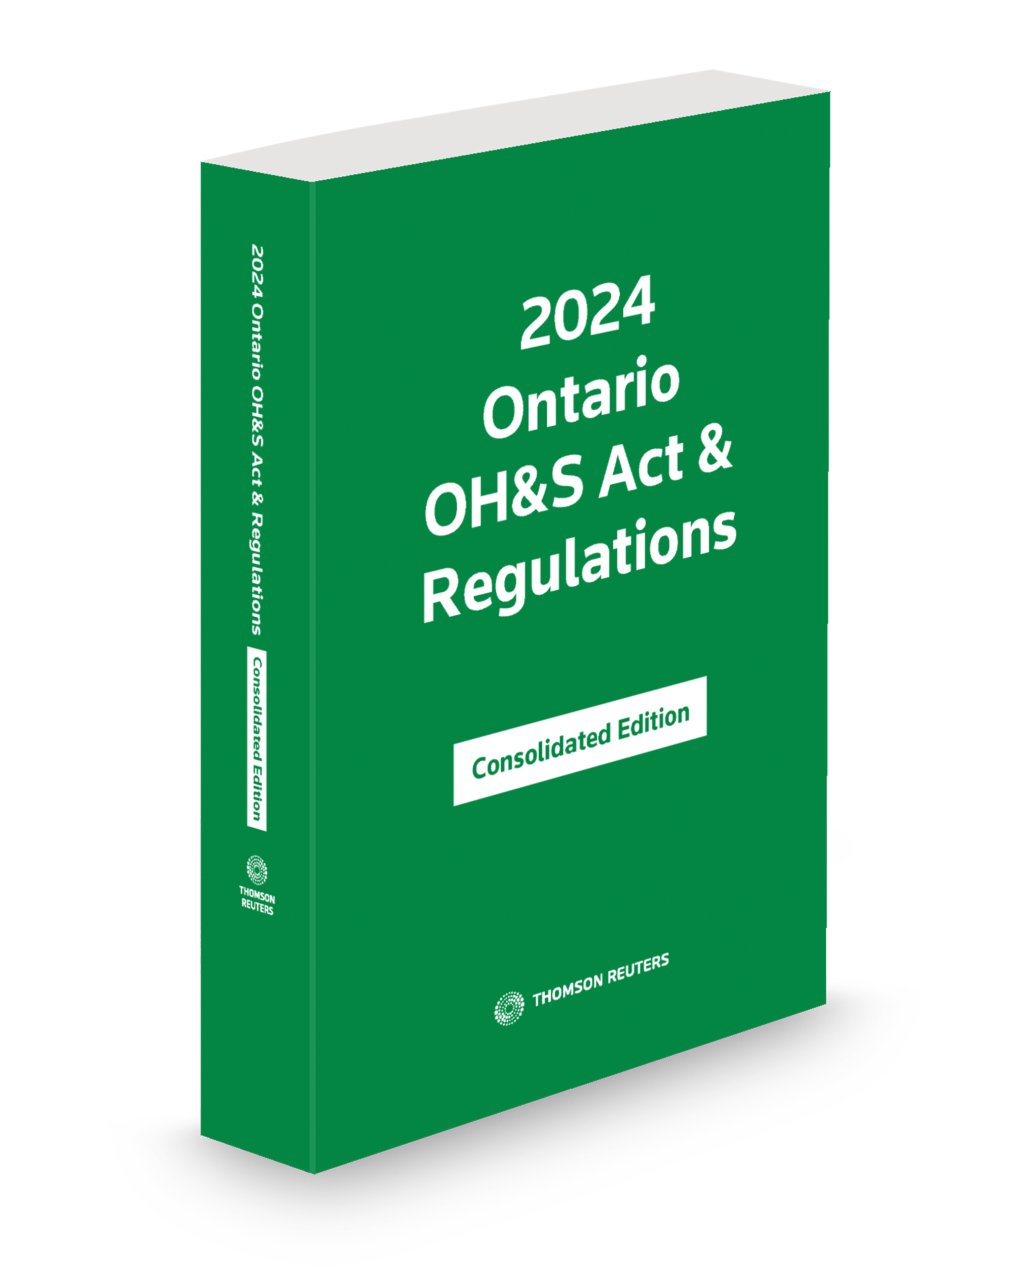 Front cover image of the Ontario OH&S Act and Regulations, Consolidated Edition, 2024.